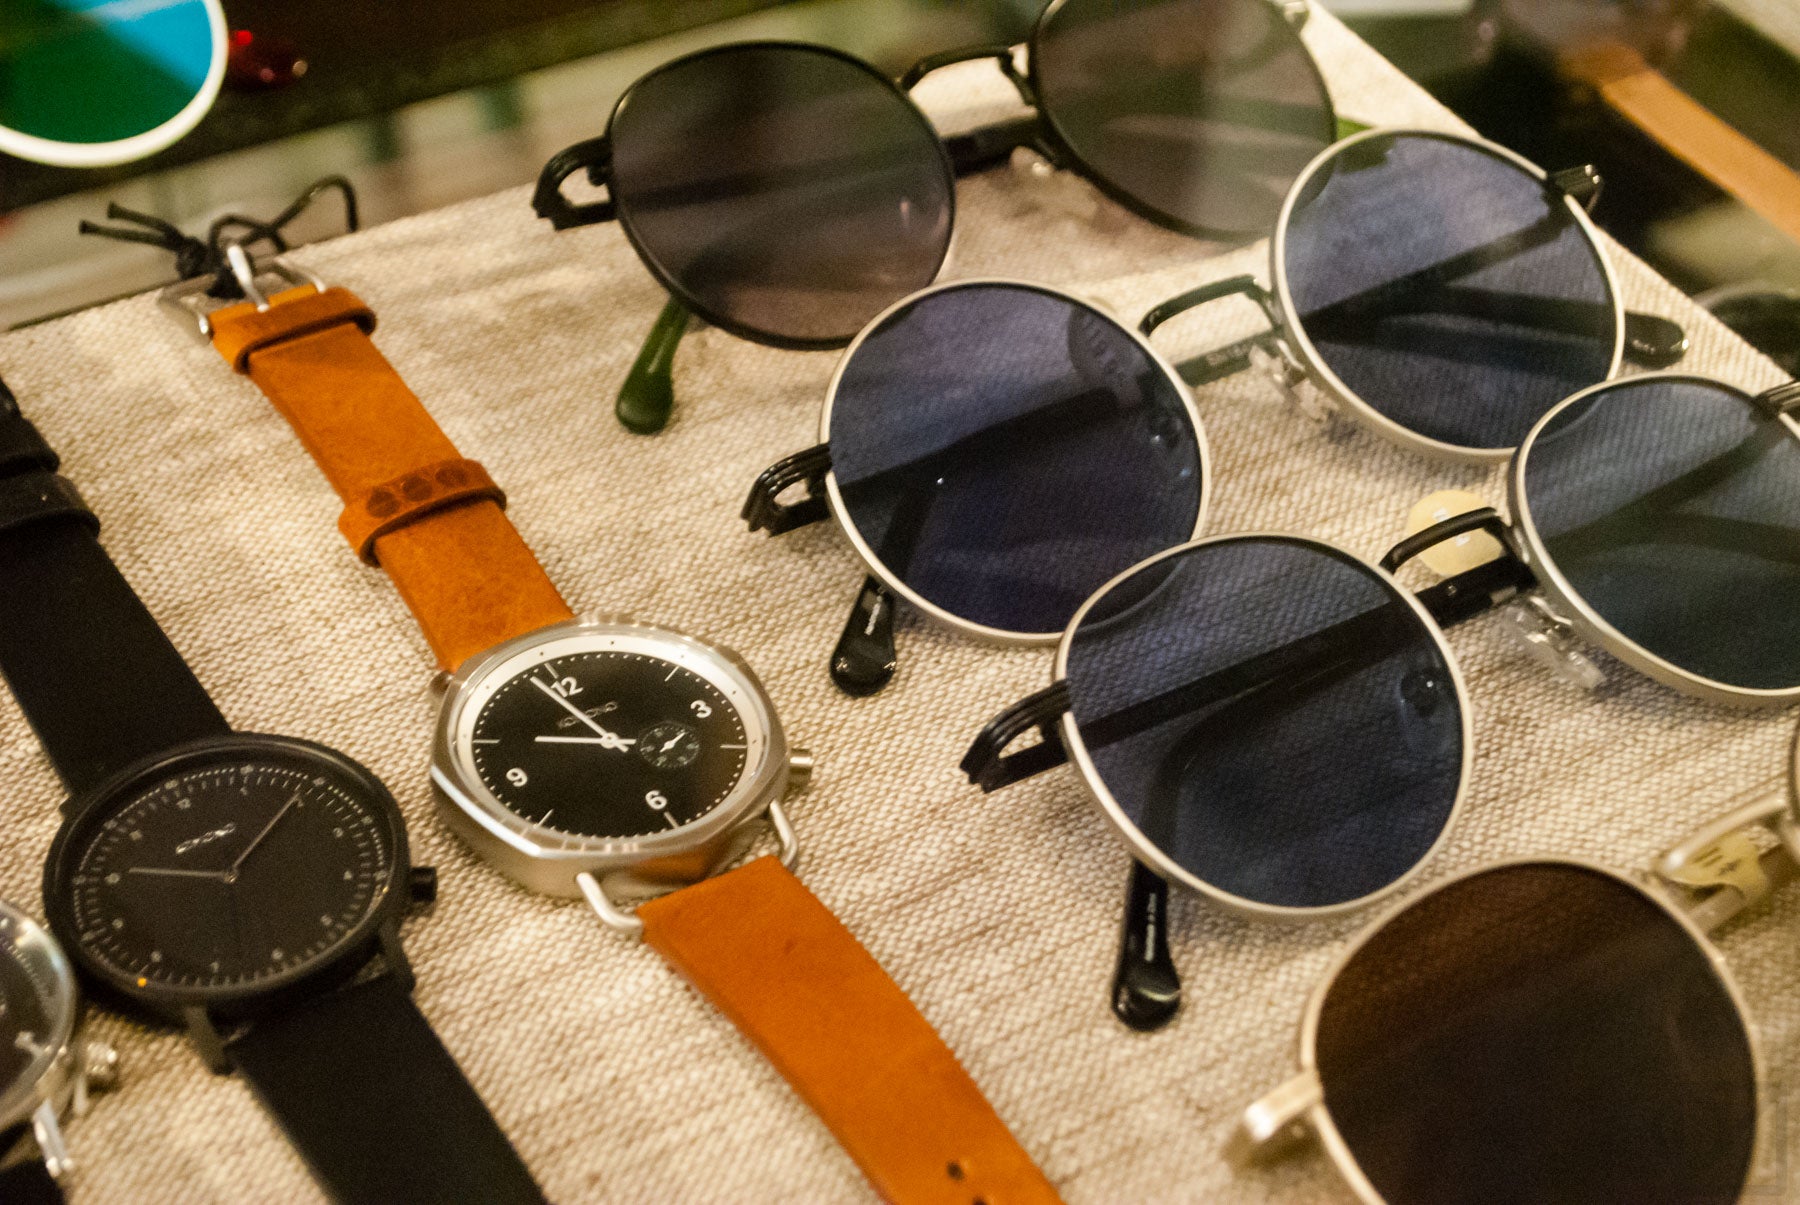 Shades and time pieces for the person who needs them